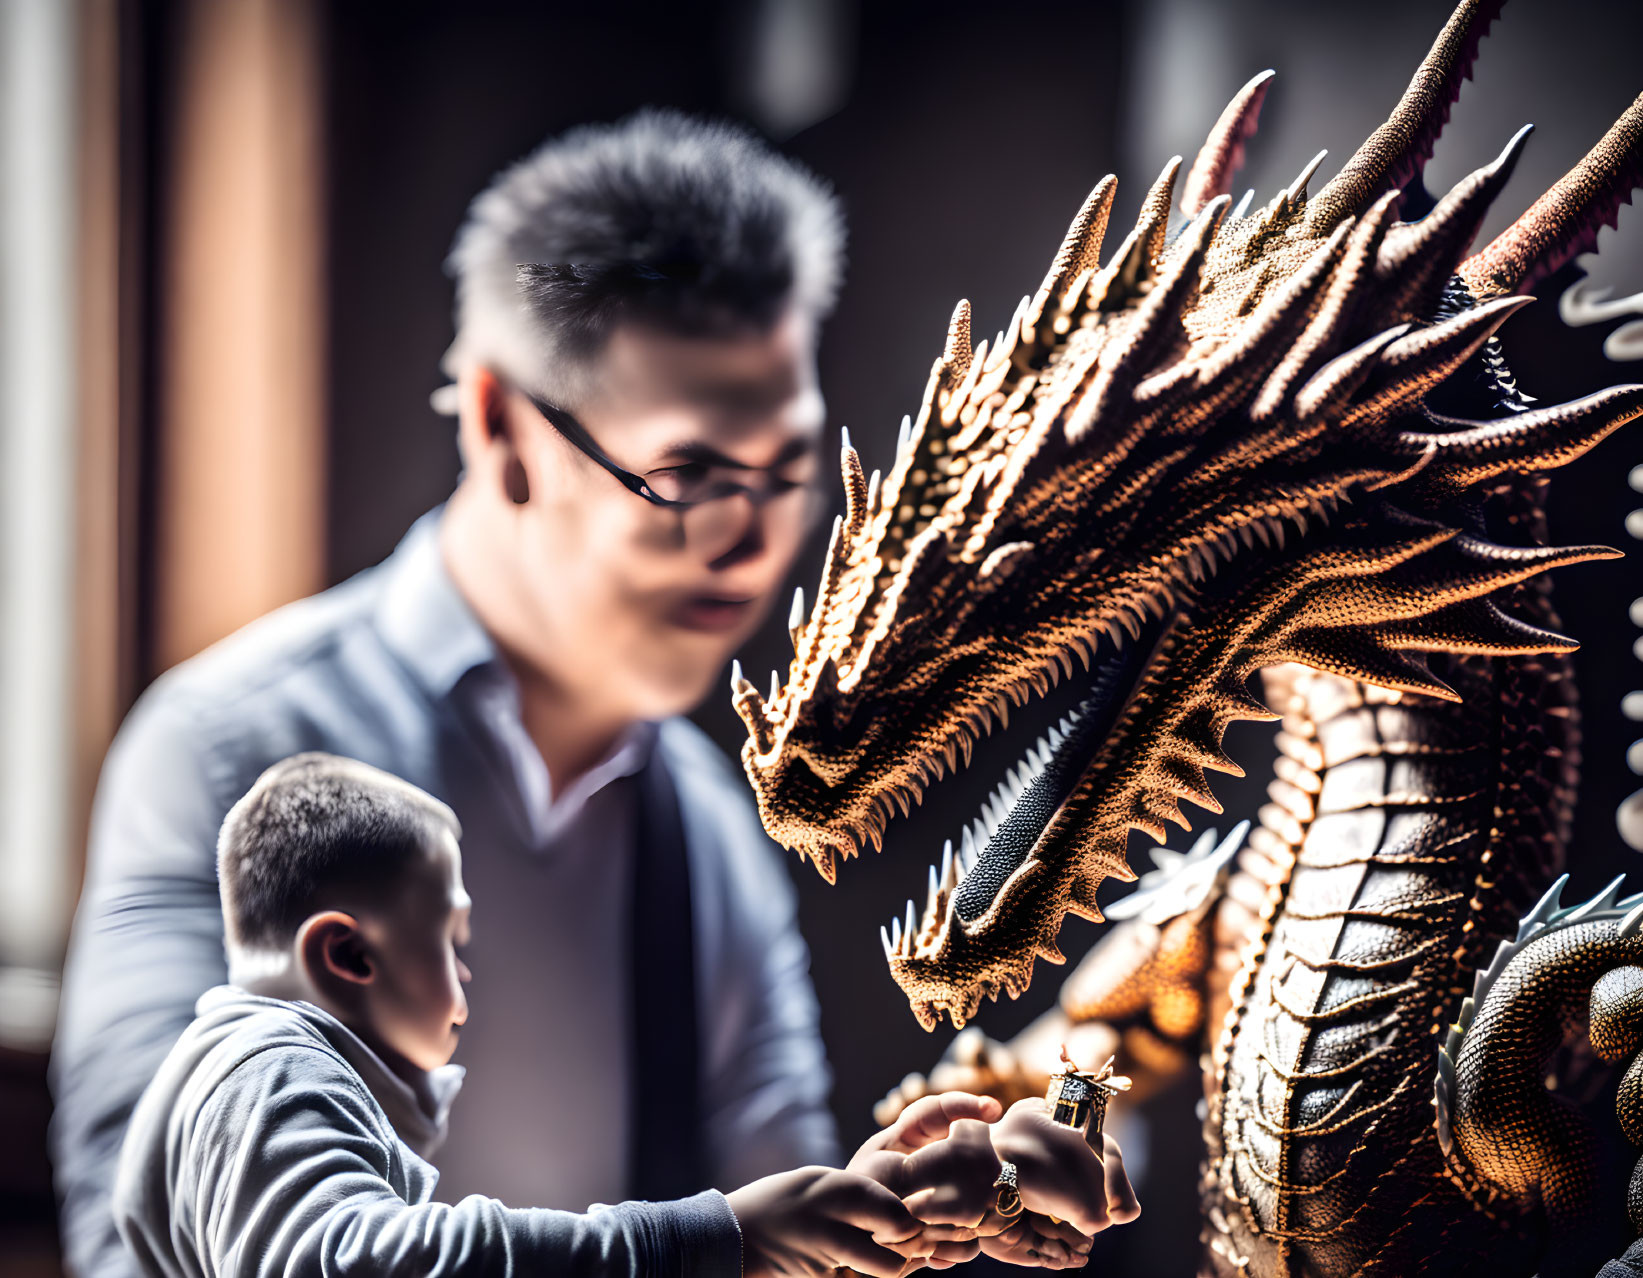 Man and child near detailed dragon sculpture in warm light, evoking cultural heritage.